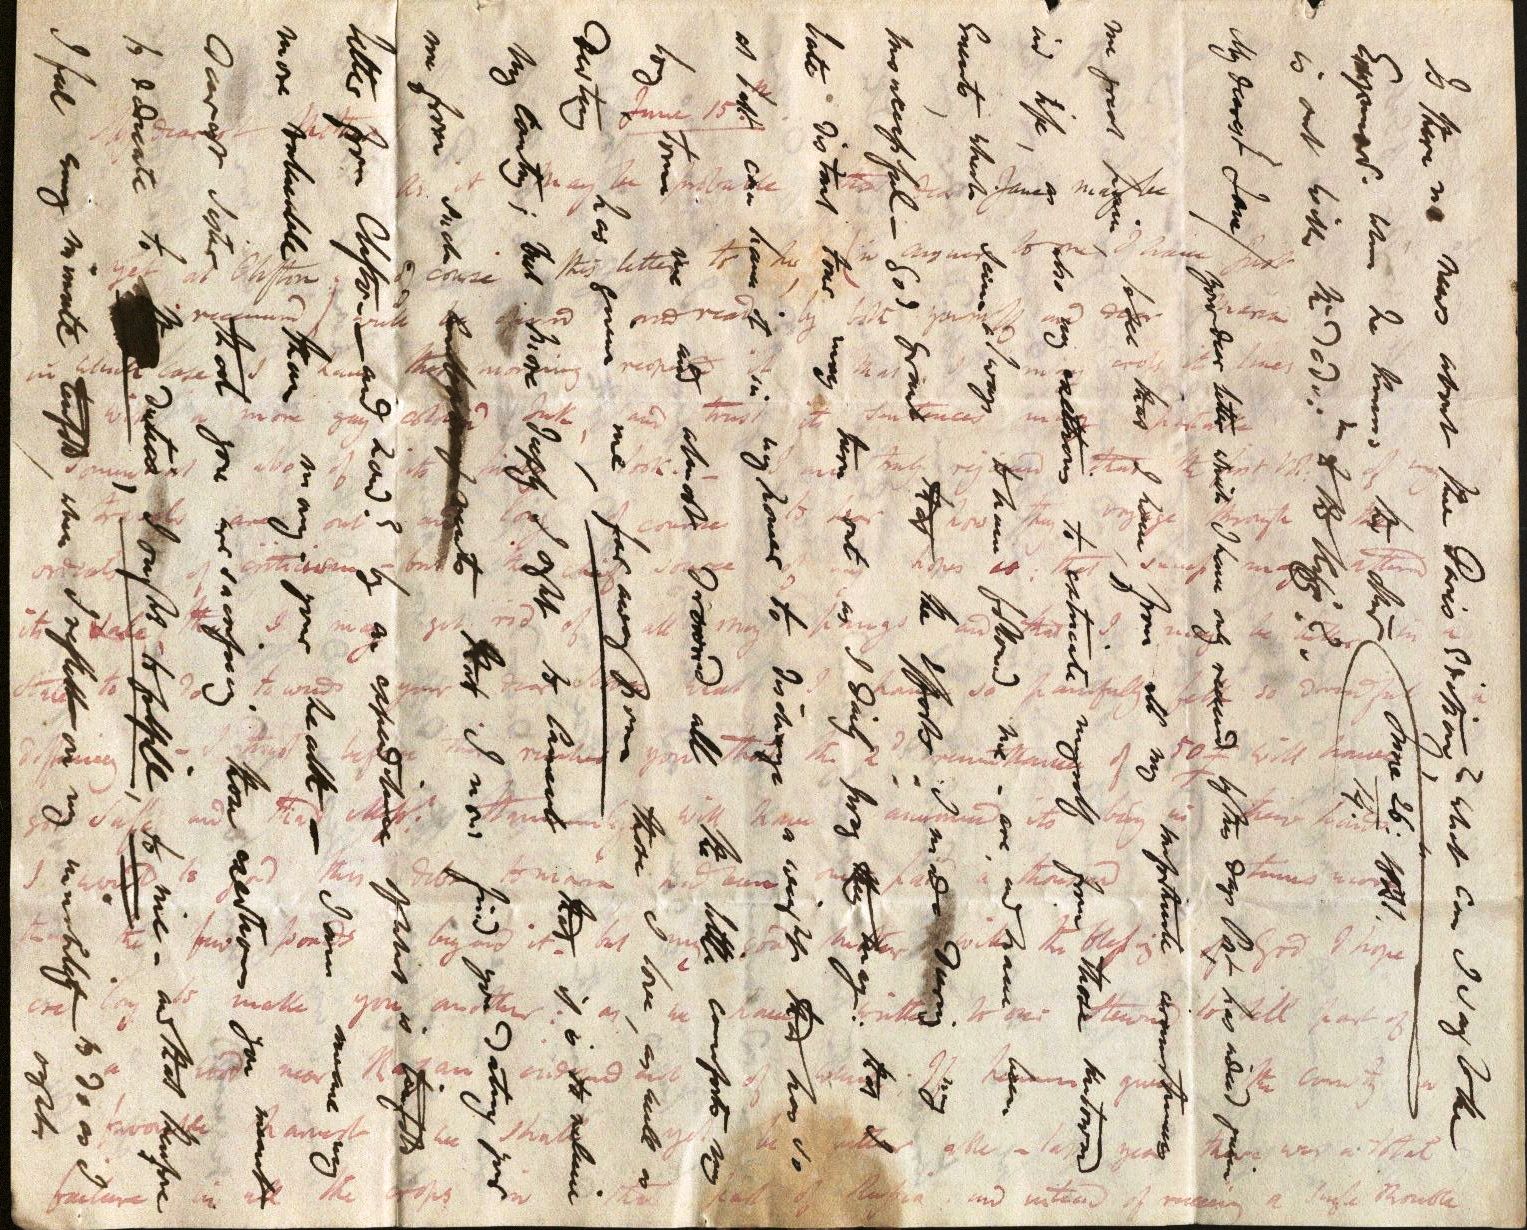 Image of the first page of a crossed Letter from Robert Ker Porter to his sister Jane and his Mother, June 14, 15, 26, 1821. Rotated 90 degrees to facilitate reading the portion of the letter in red ink.